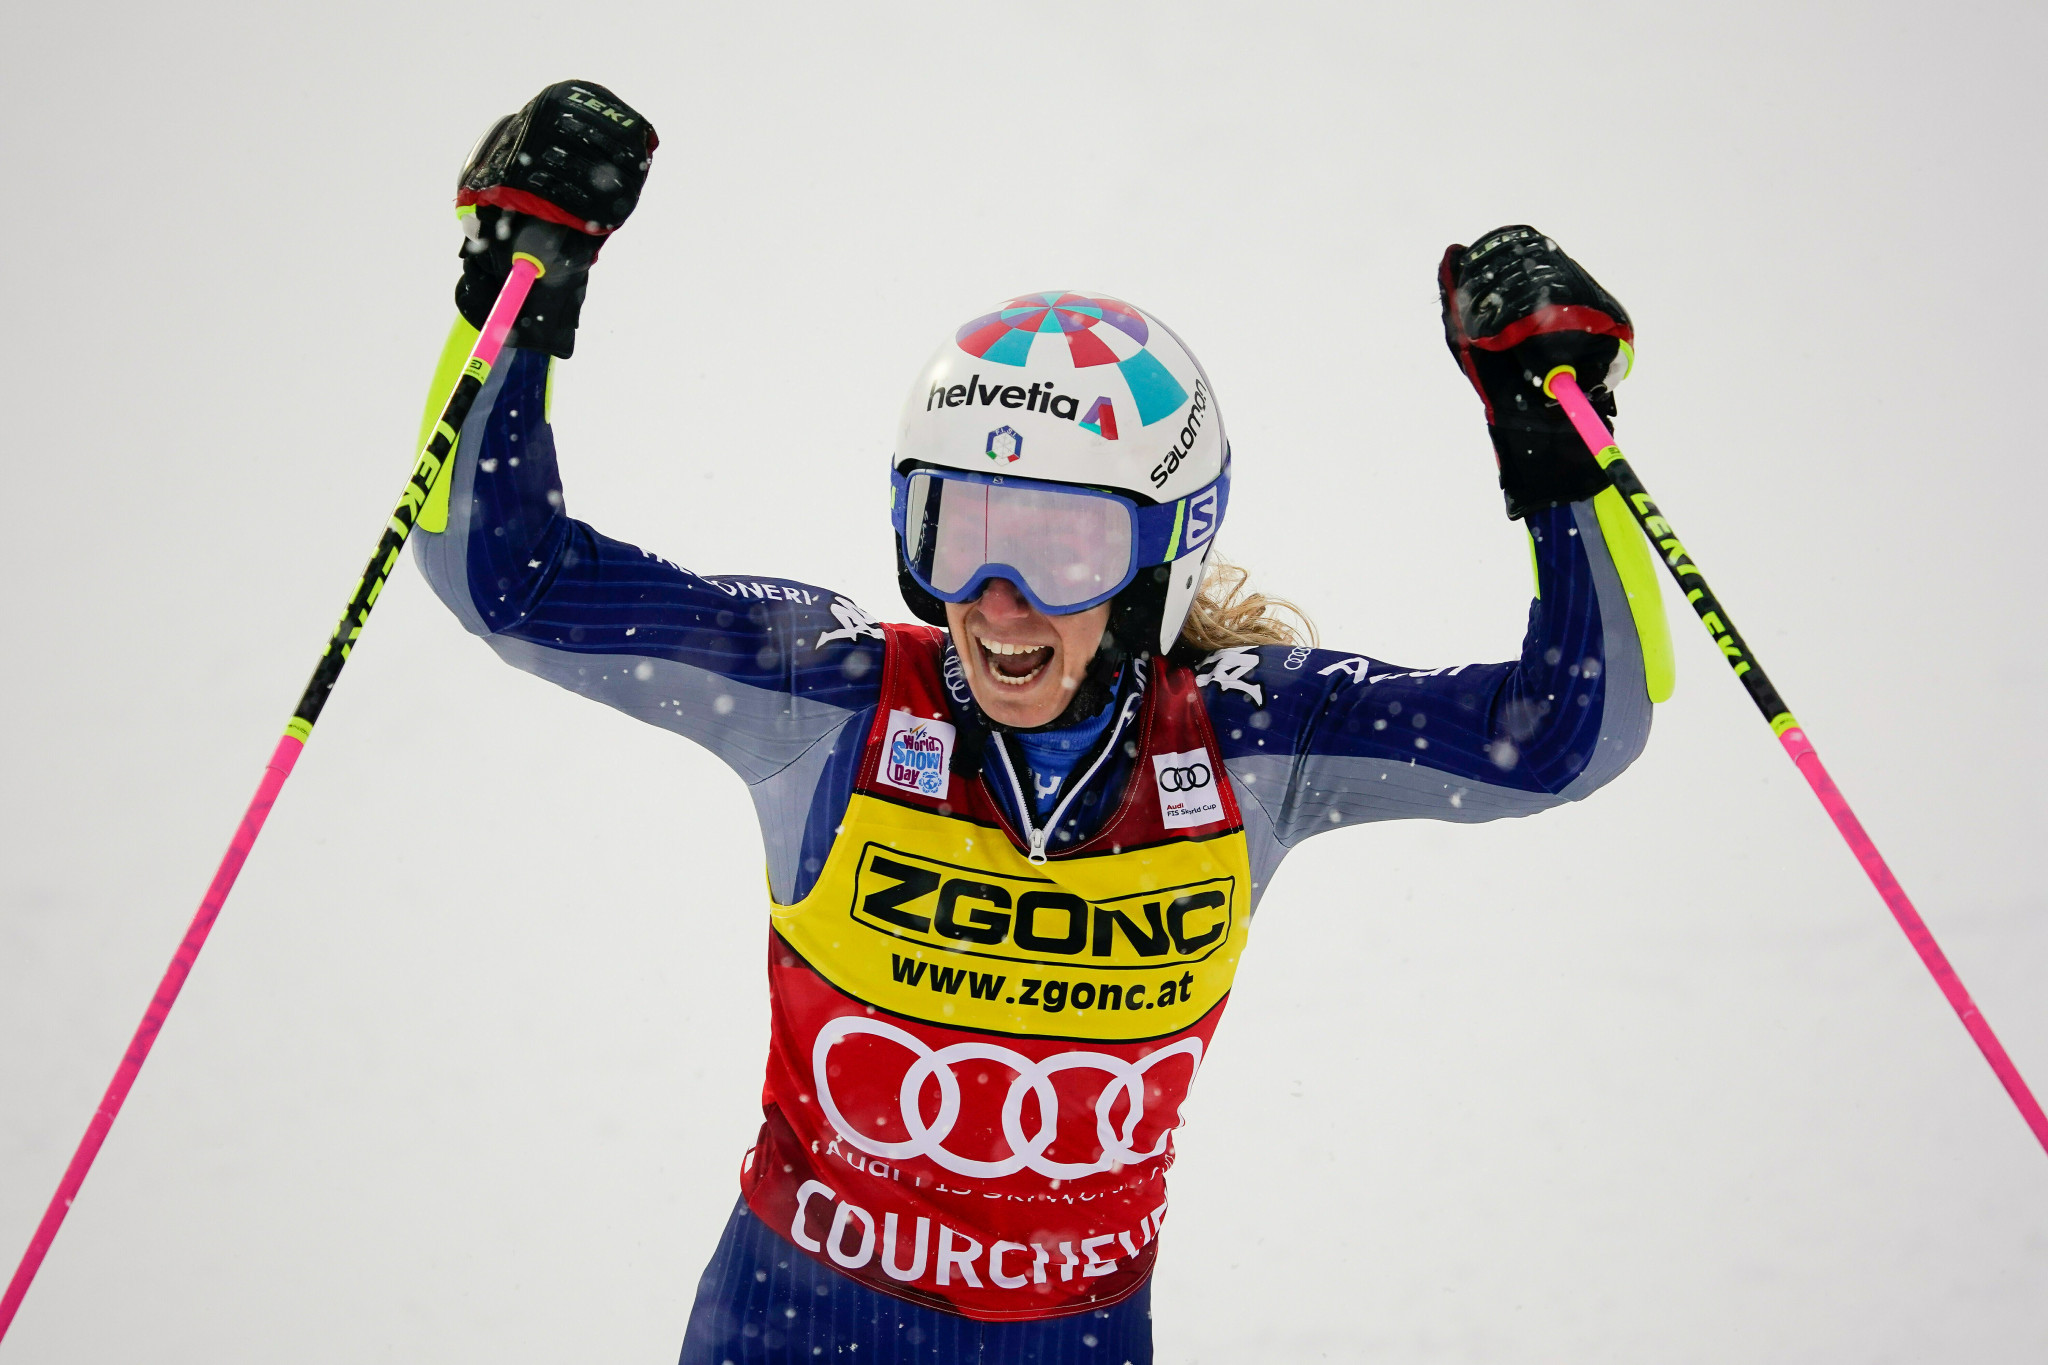 Marta Bassino won the giant slalom at the FIS Alpine Ski World Cup in Courchevel ©Getty Images